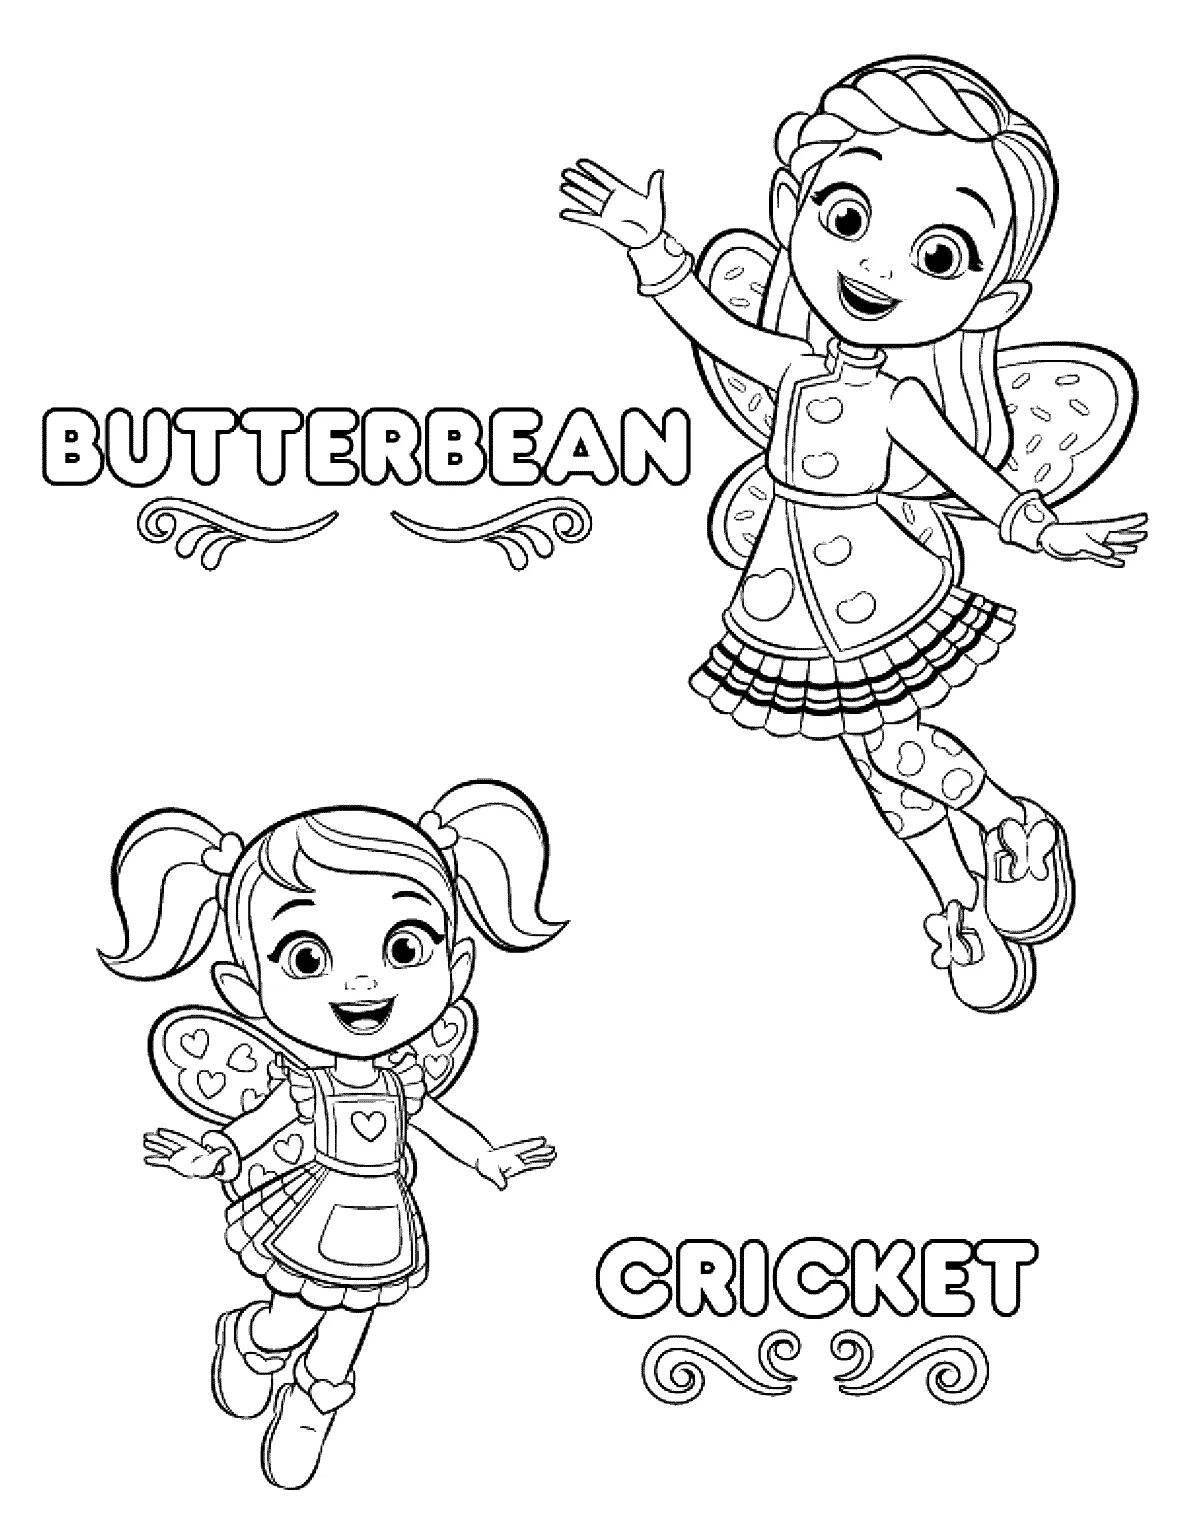 Coloring book glowing cafe butterbean